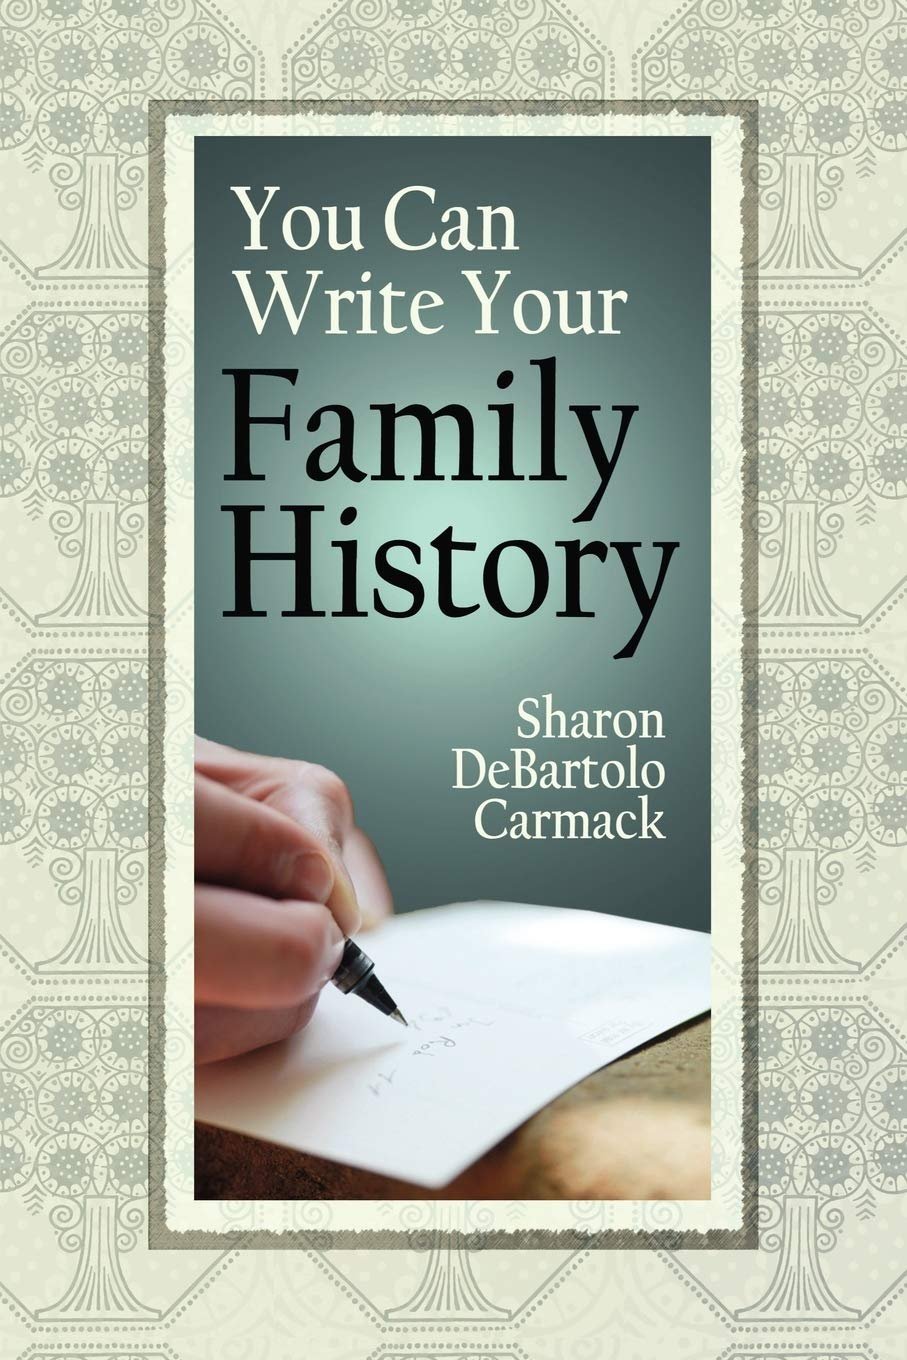  The best books on writing family history include  You Can Write Your Family History  by Sharon DeBartolo Carmack 